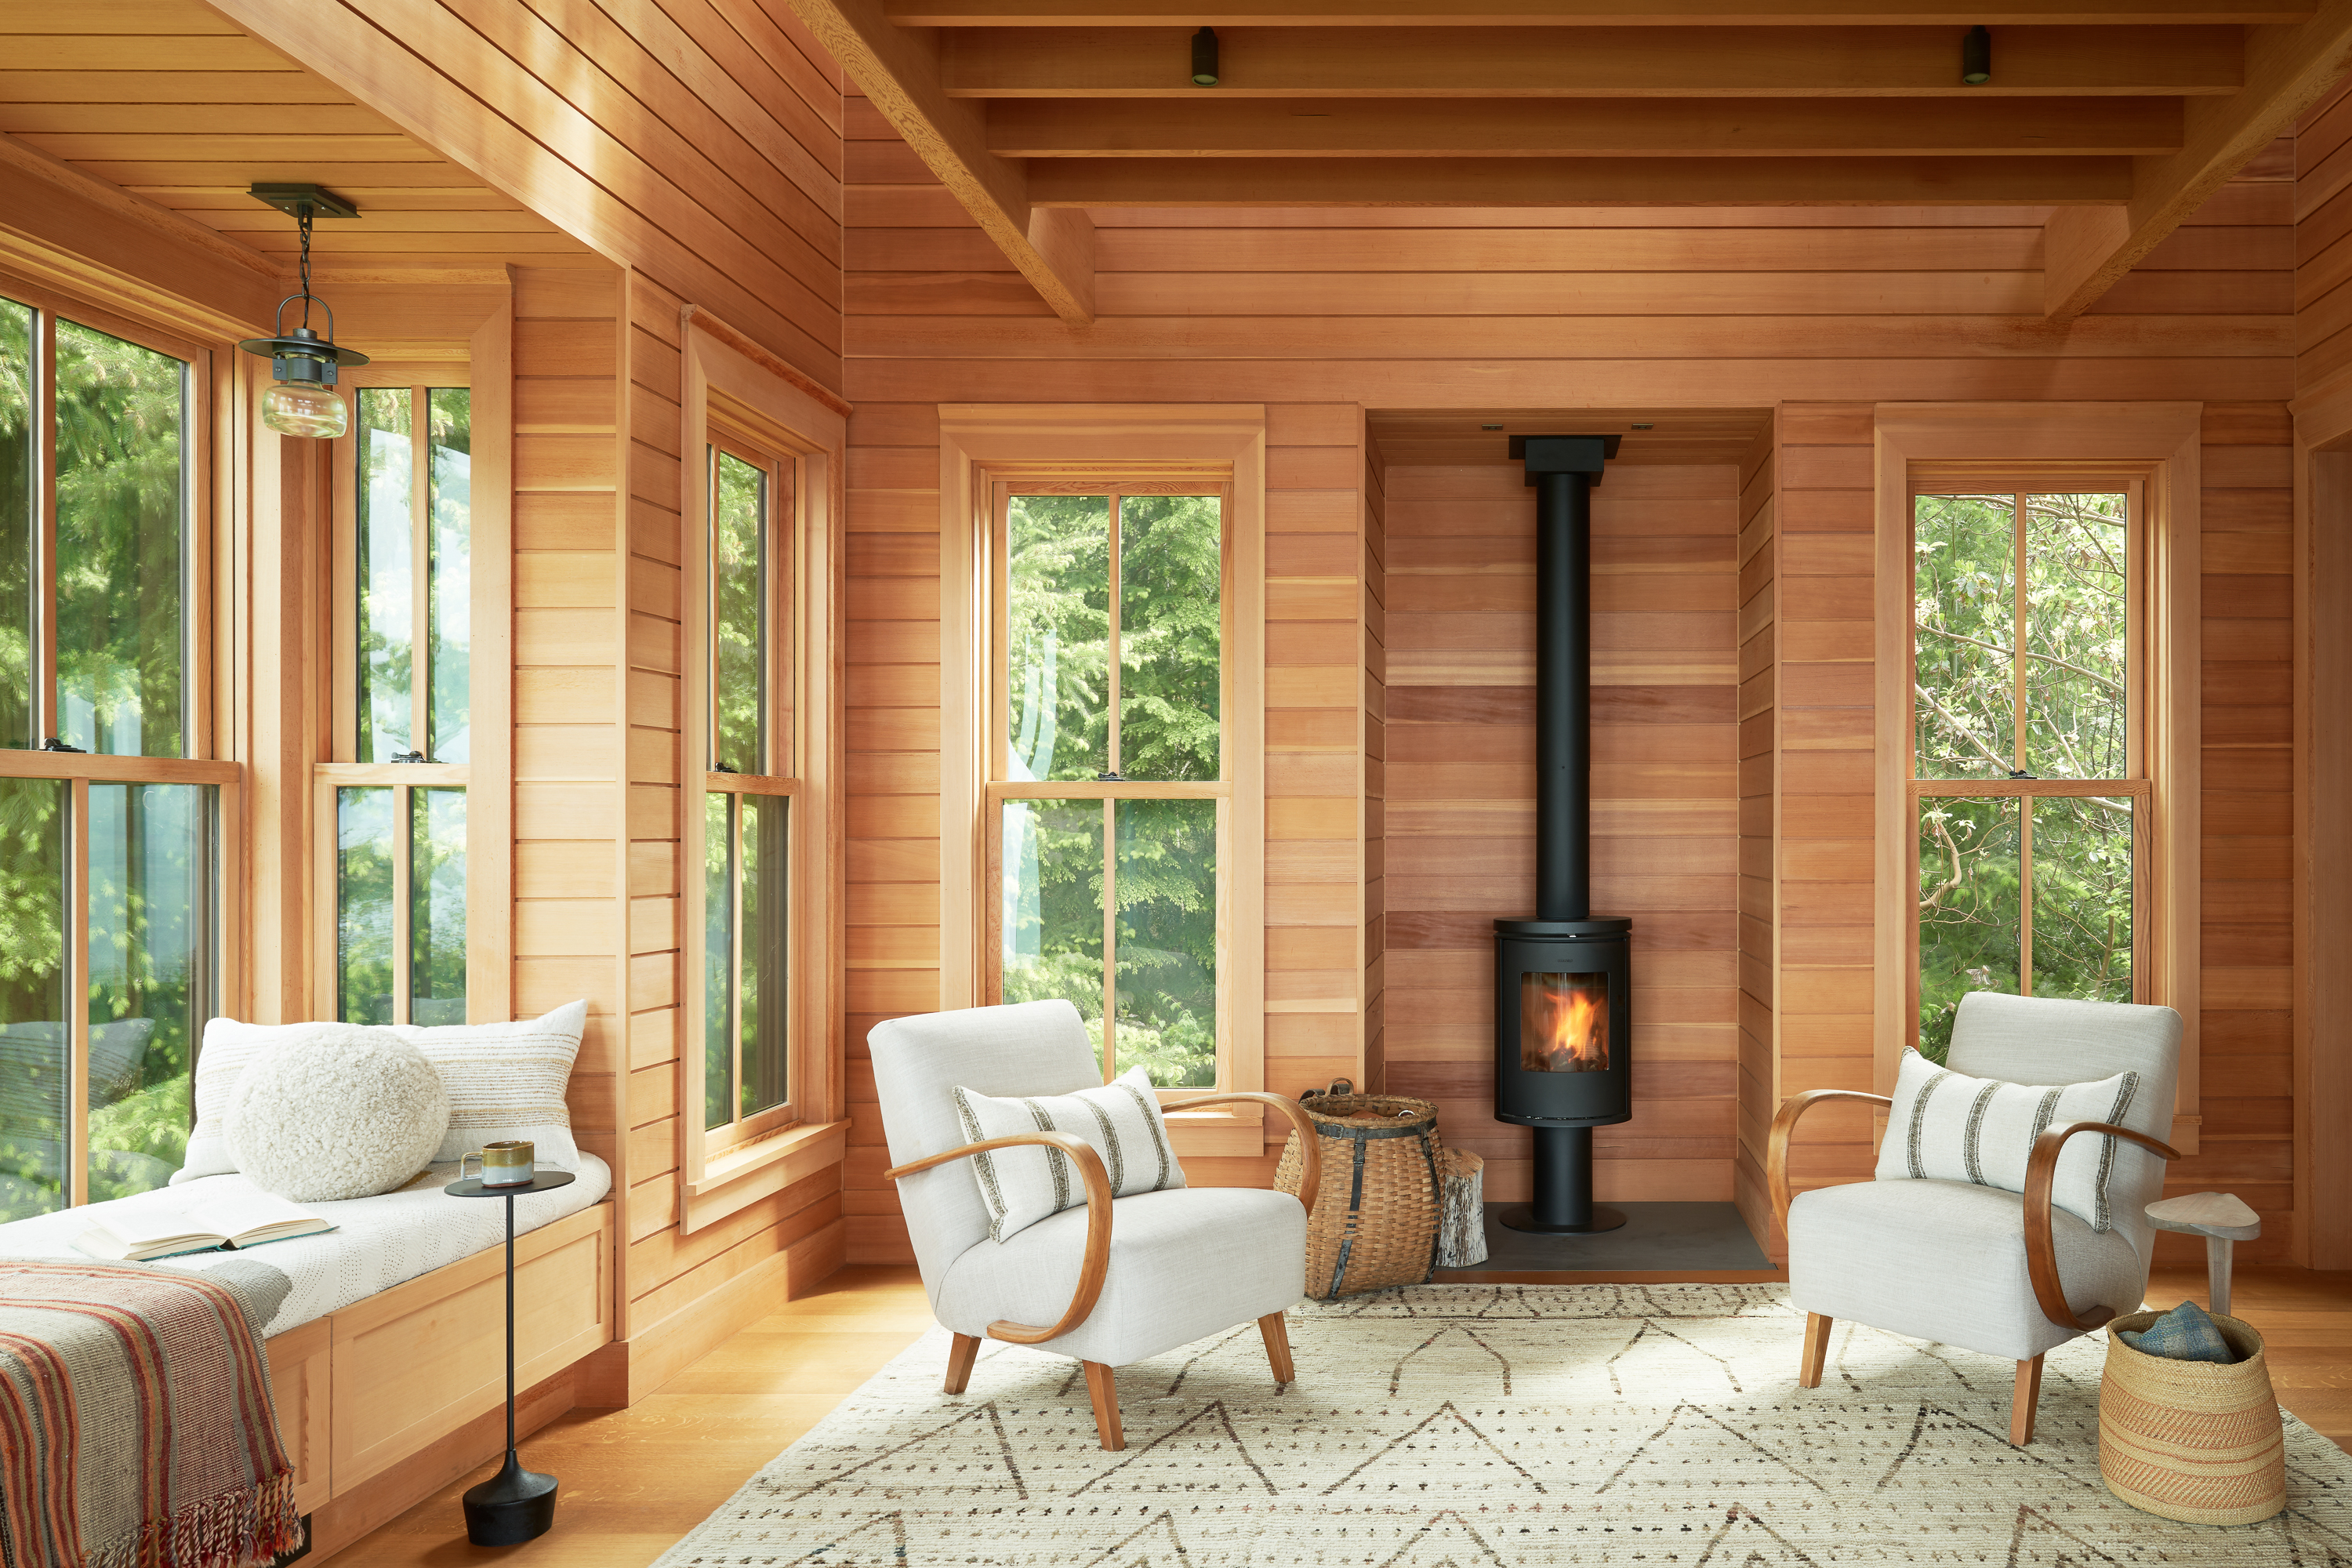 Bright and warm cedar clad living space with a wood burning stove.